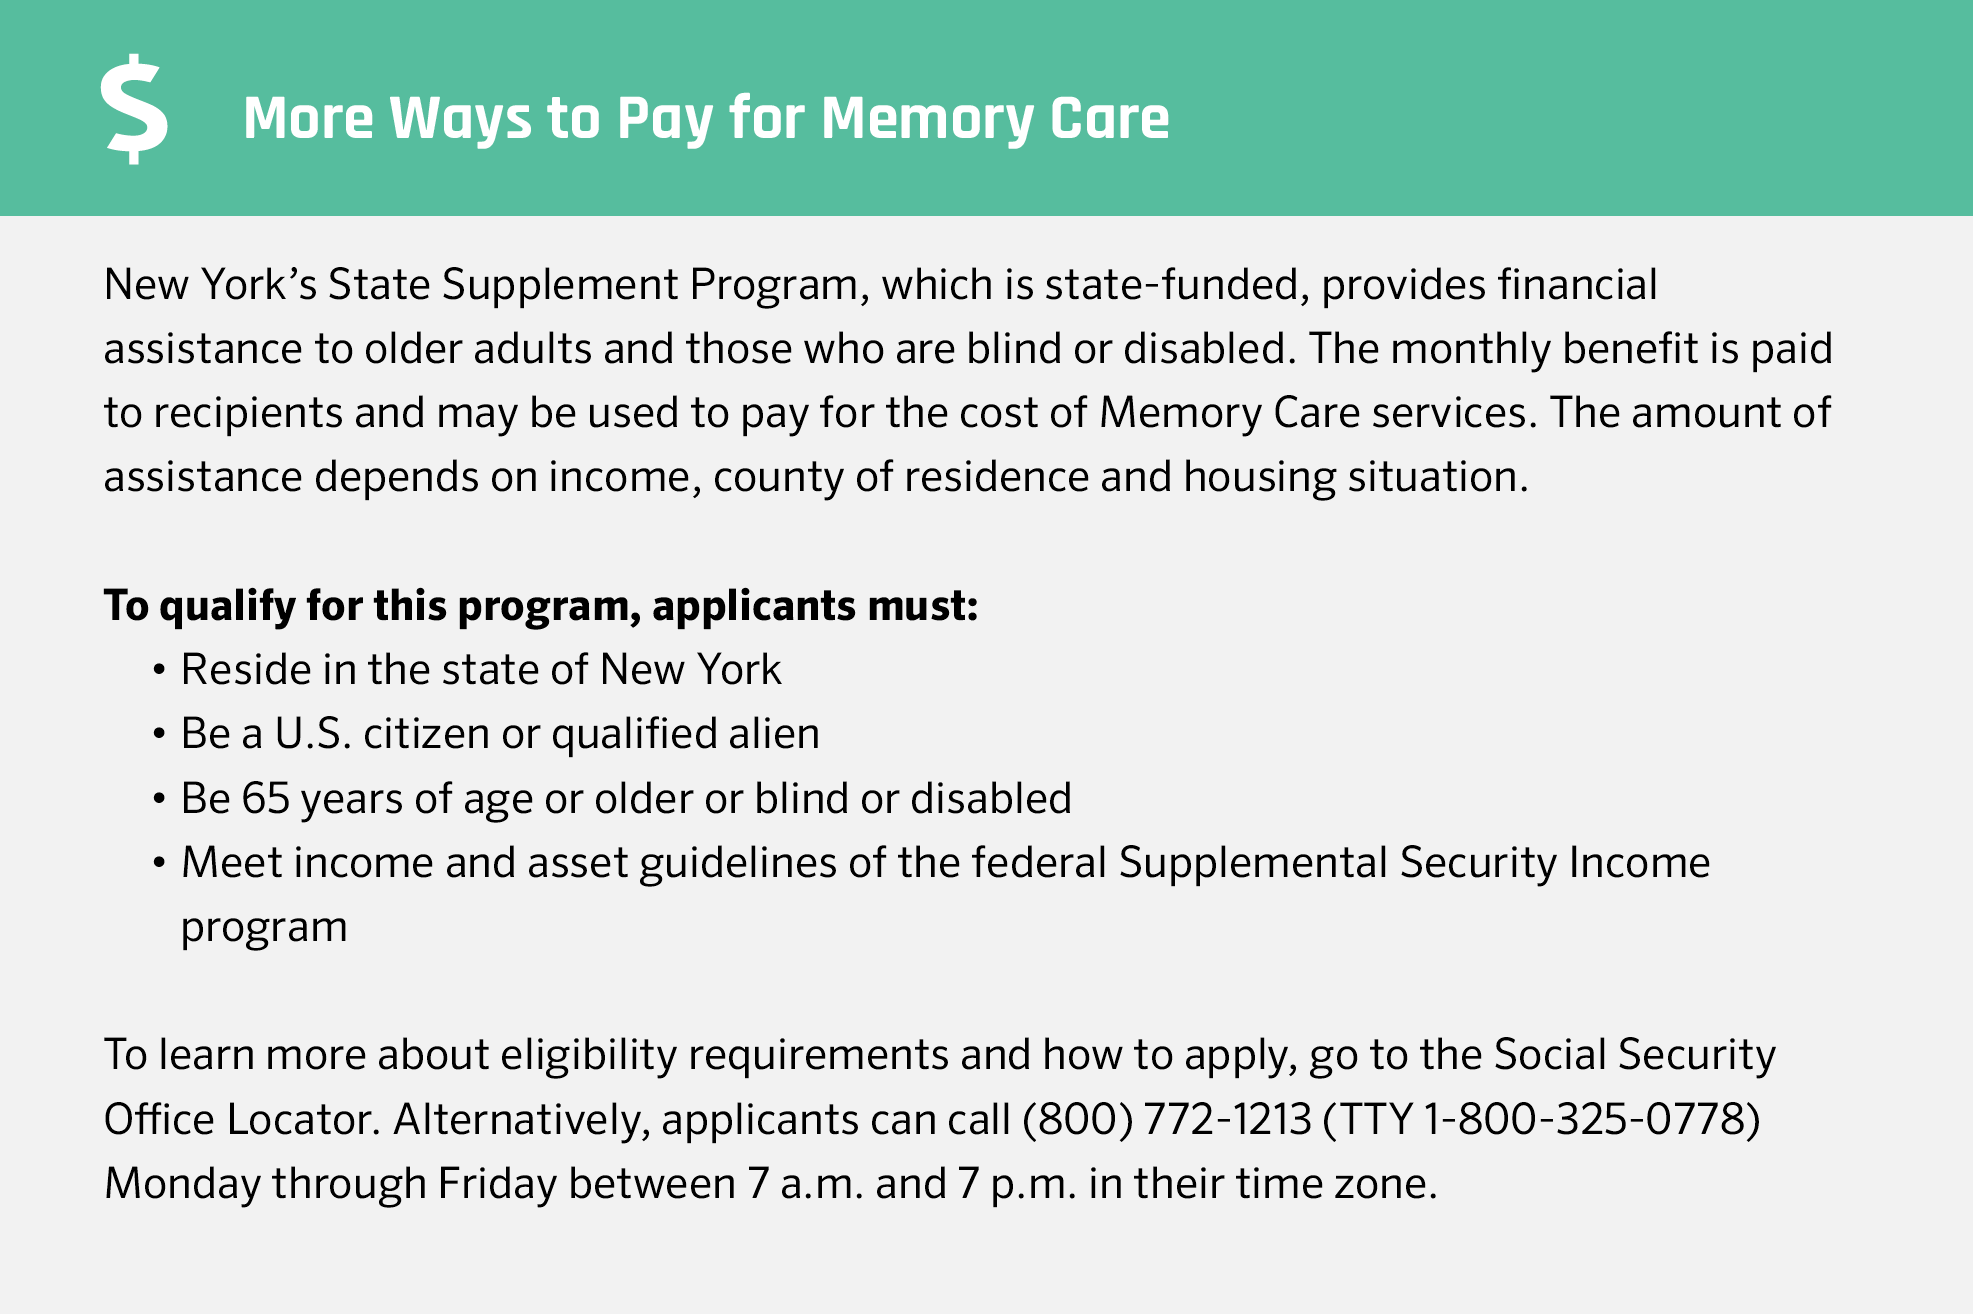 Memory care financial assistance in New York